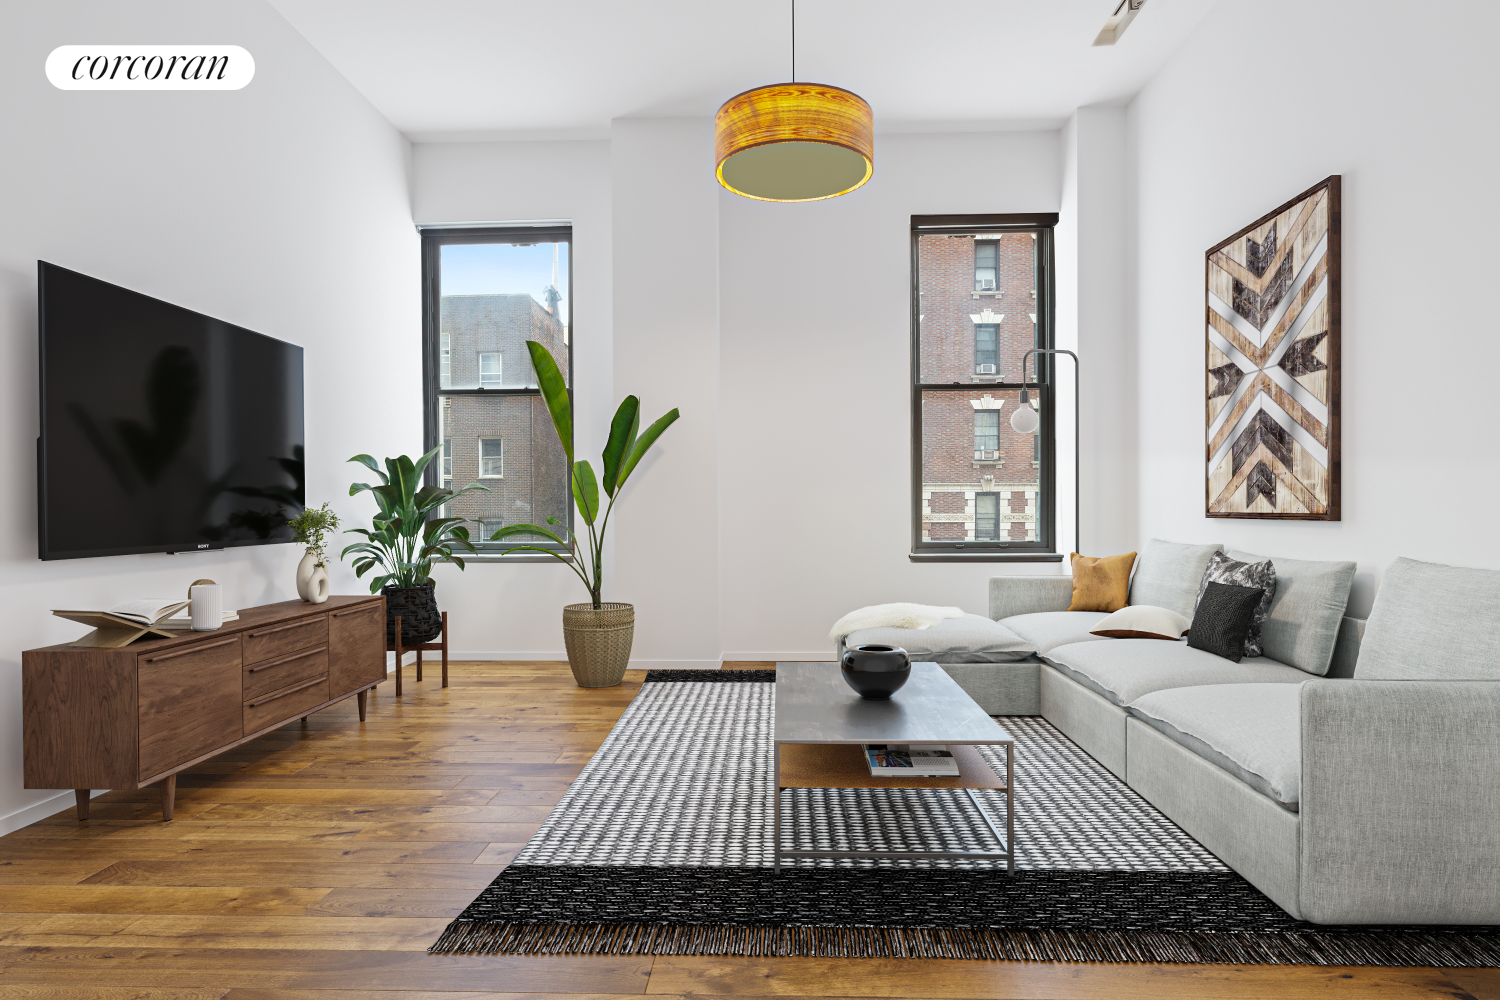 305 2nd Avenue 318, Gramercy Park, Downtown, NYC - 2 Bedrooms  
2 Bathrooms  
5 Rooms - 